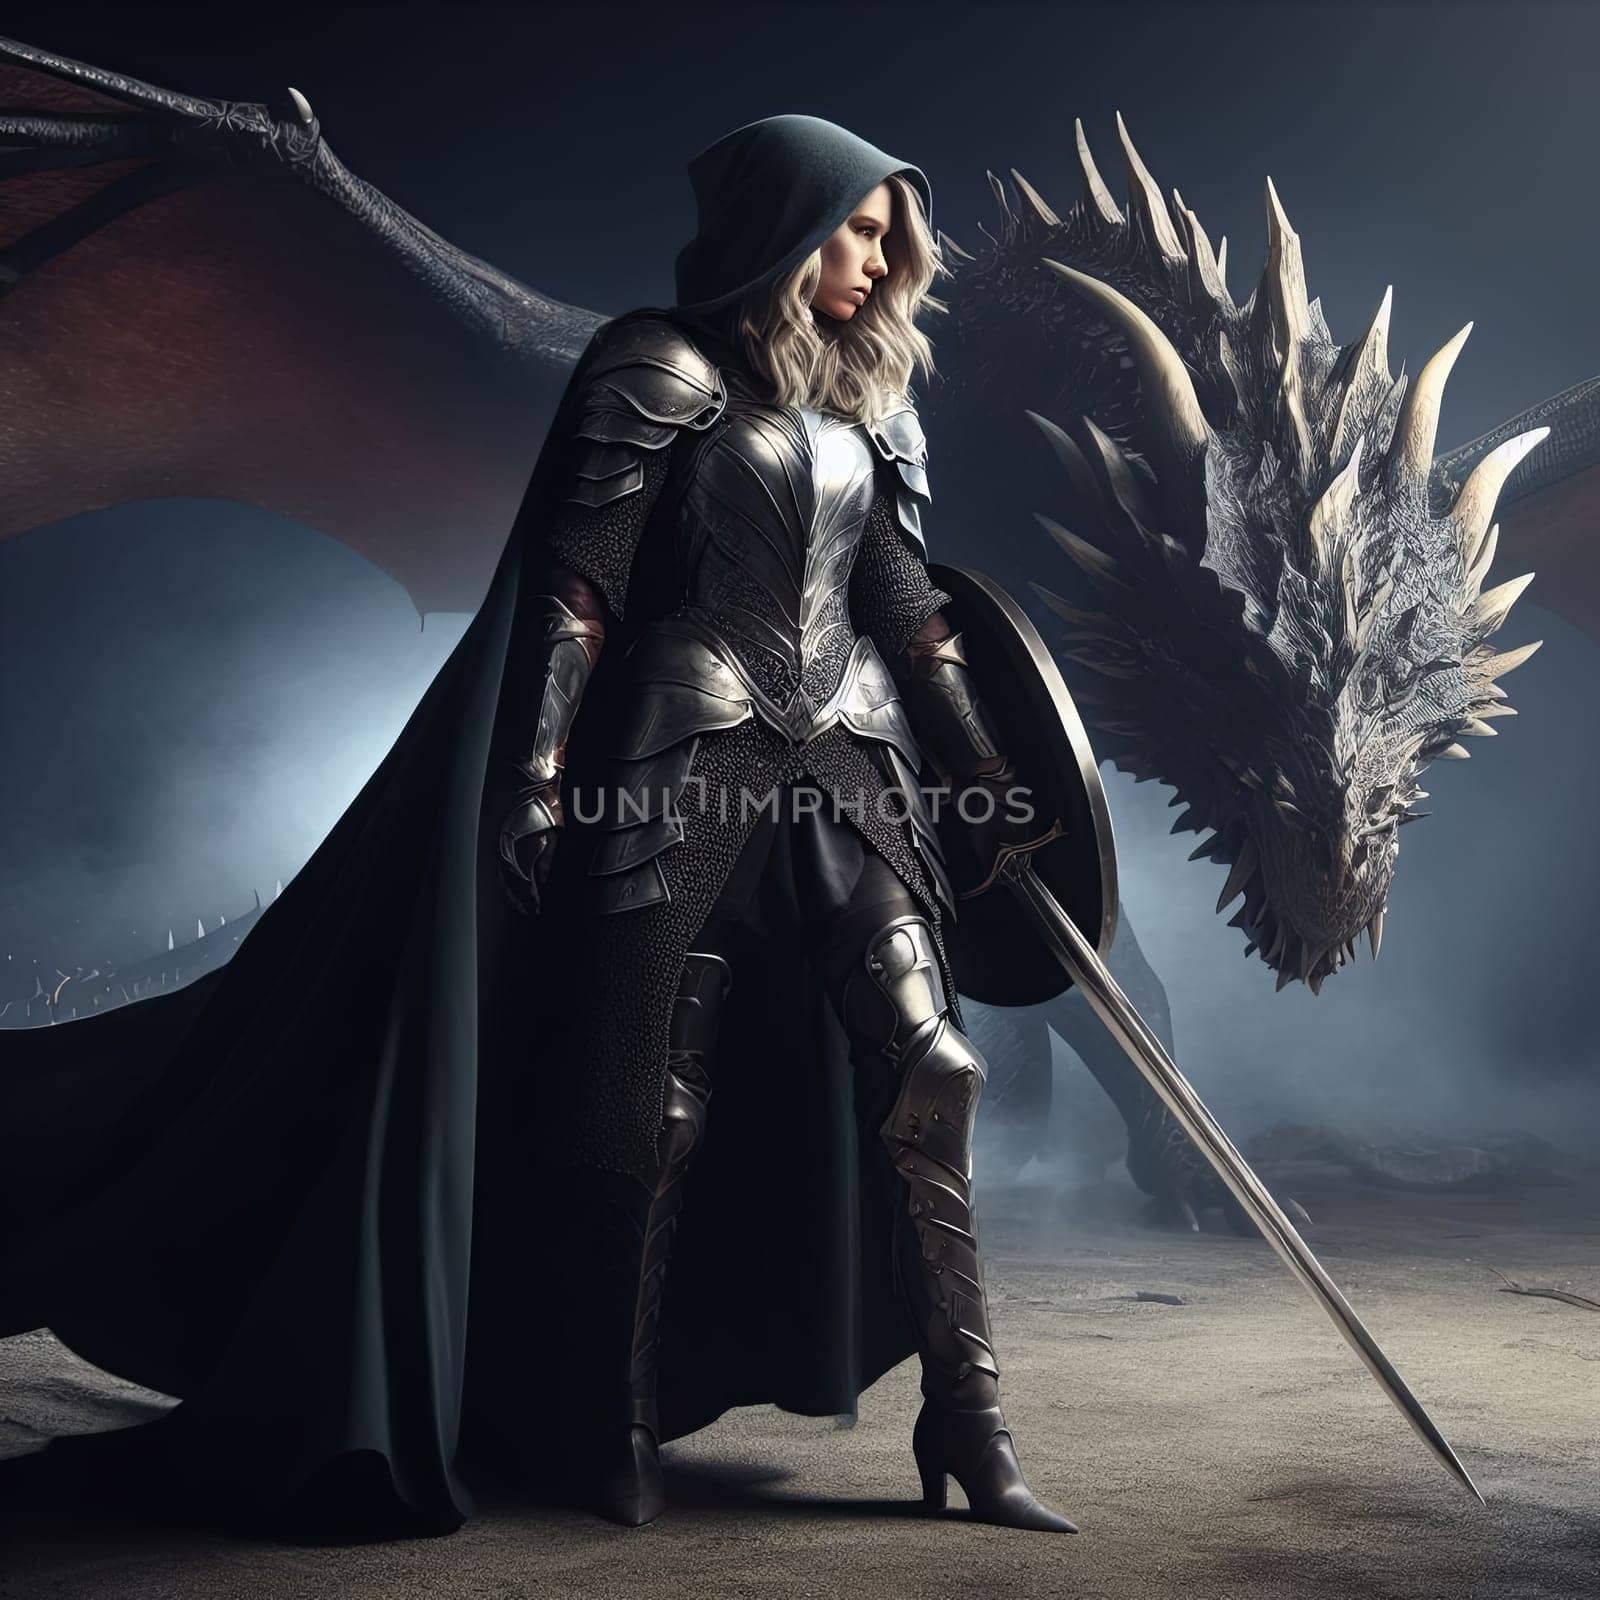 Woman Knight in armor standing against a dragon with spread wings in a fantasy setting